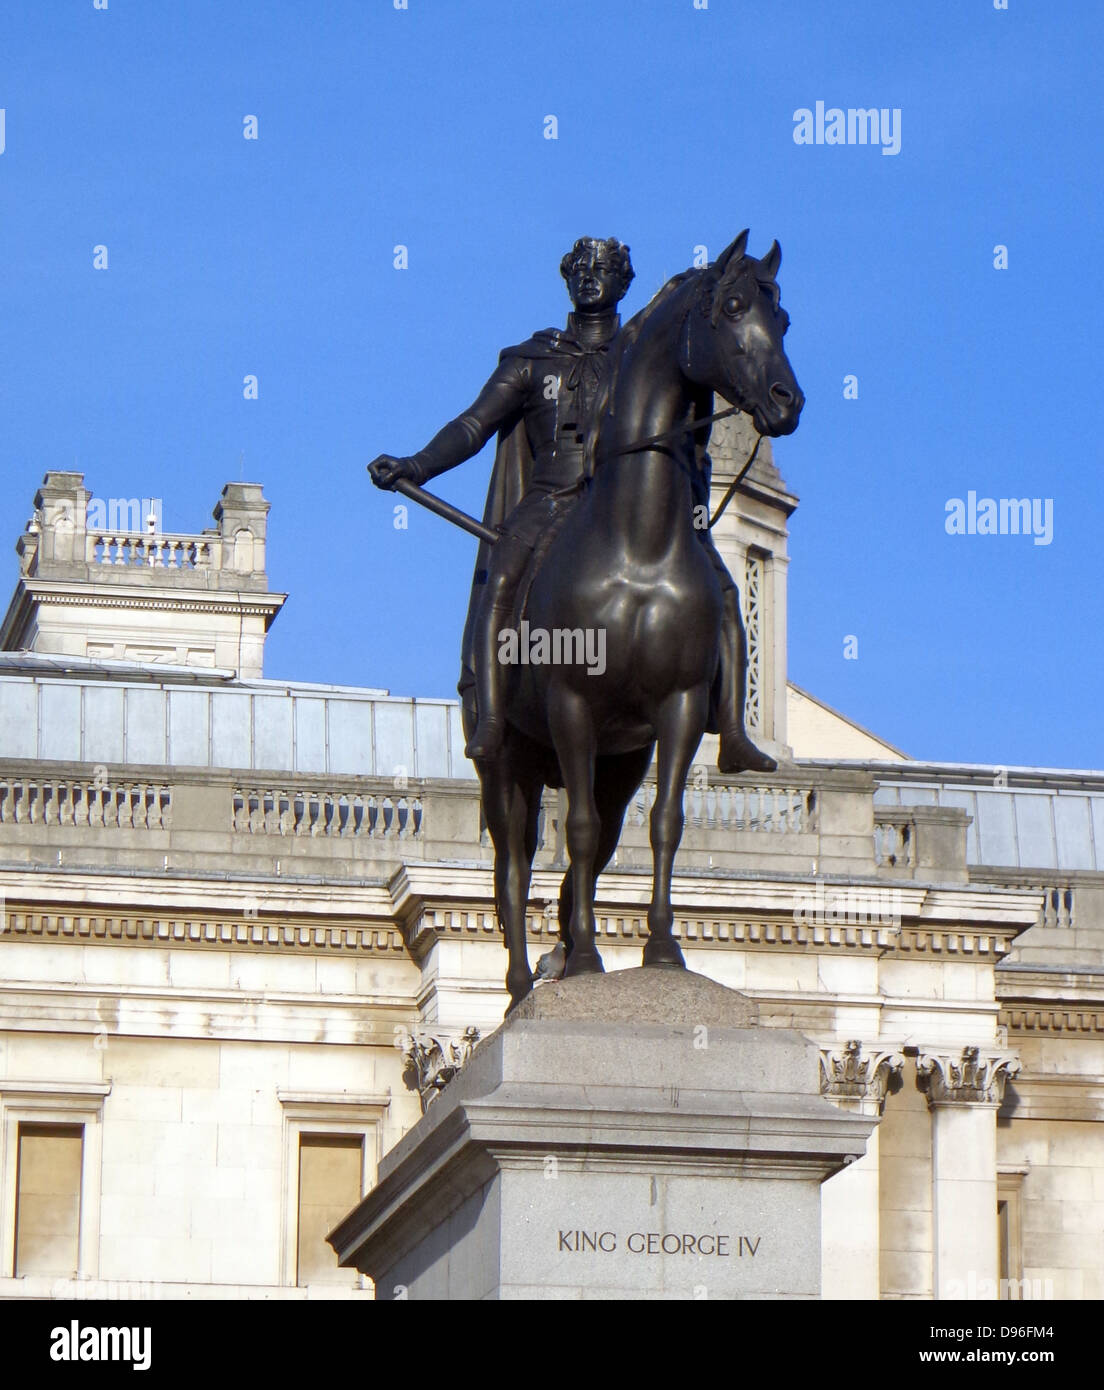 Sculpture of King George IV on horseback. Bronze equestrian statue by Sir Francis Legatt Chantrey Located in Trafalgar Square, London. Cast in 1828, unveiled in 1843. Stock Photo